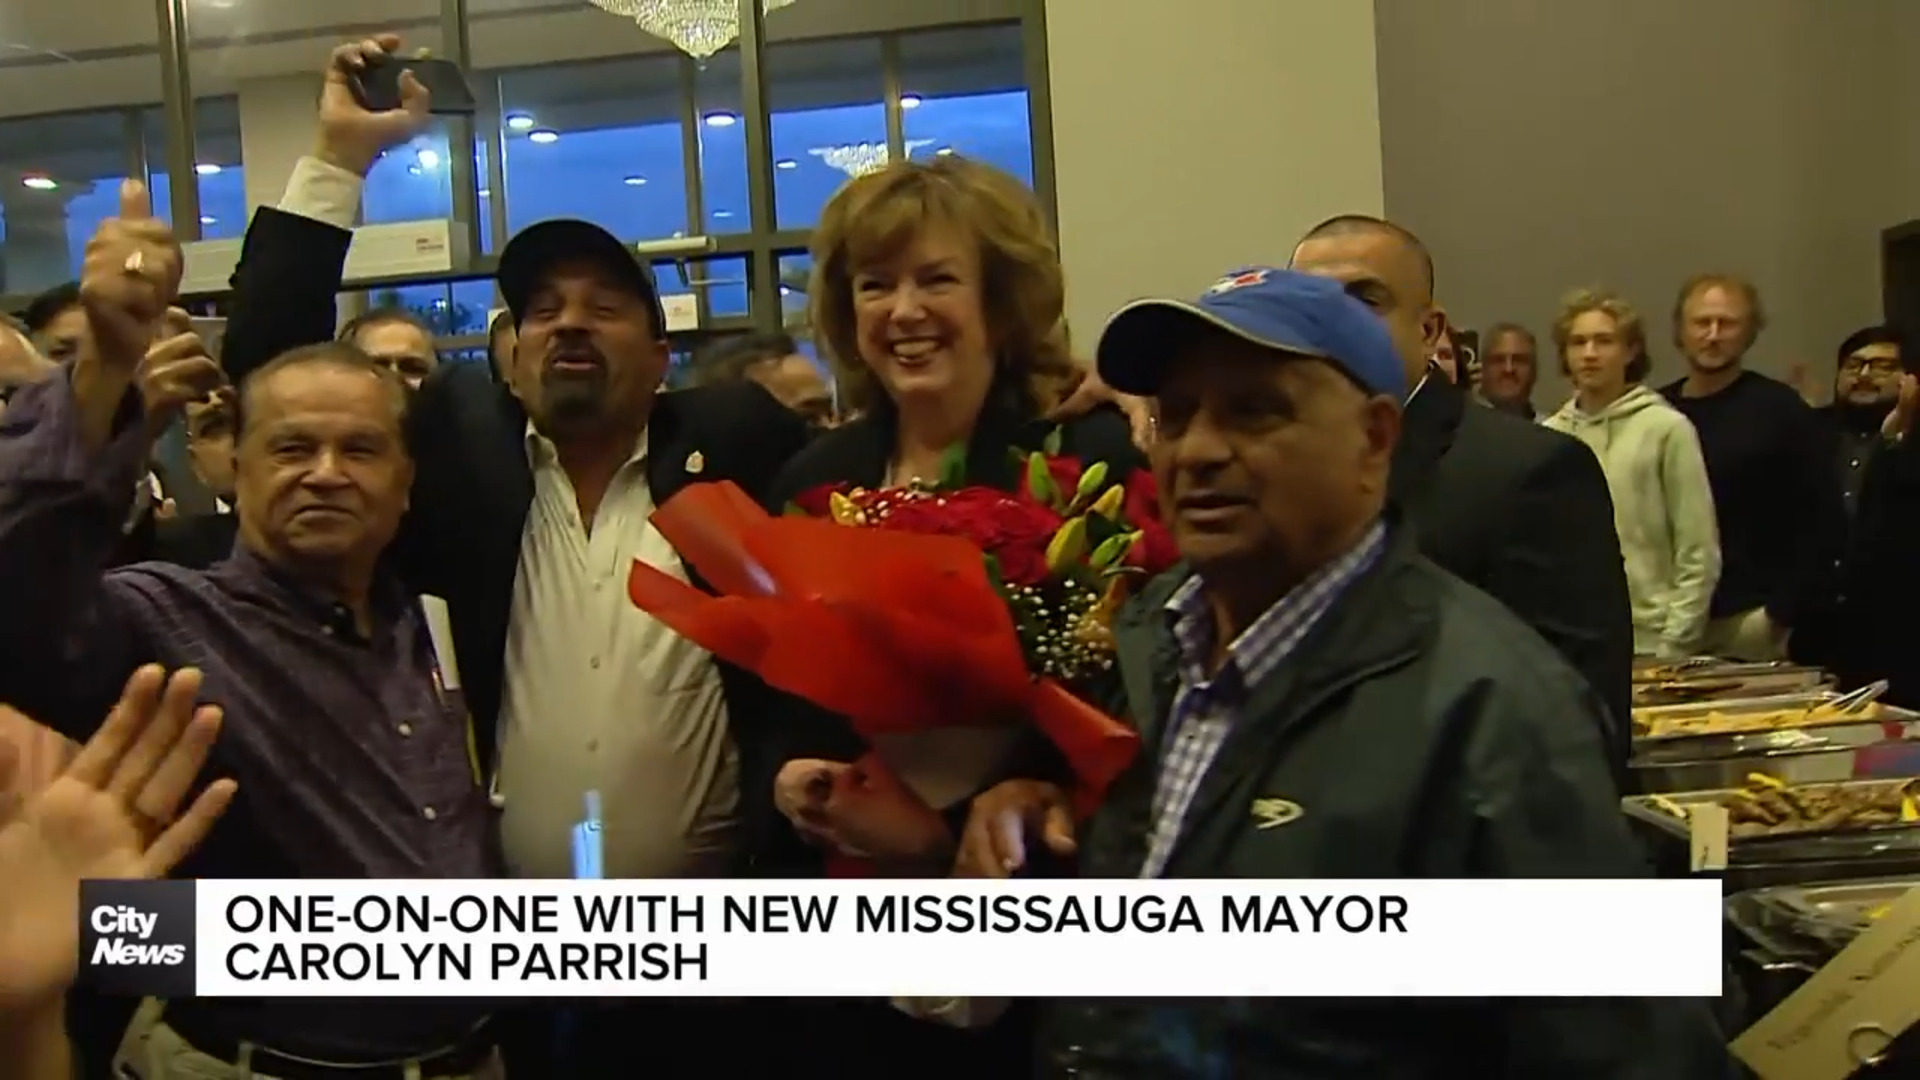 Mayor Carolyn Parrish takes the reins in Mississauga